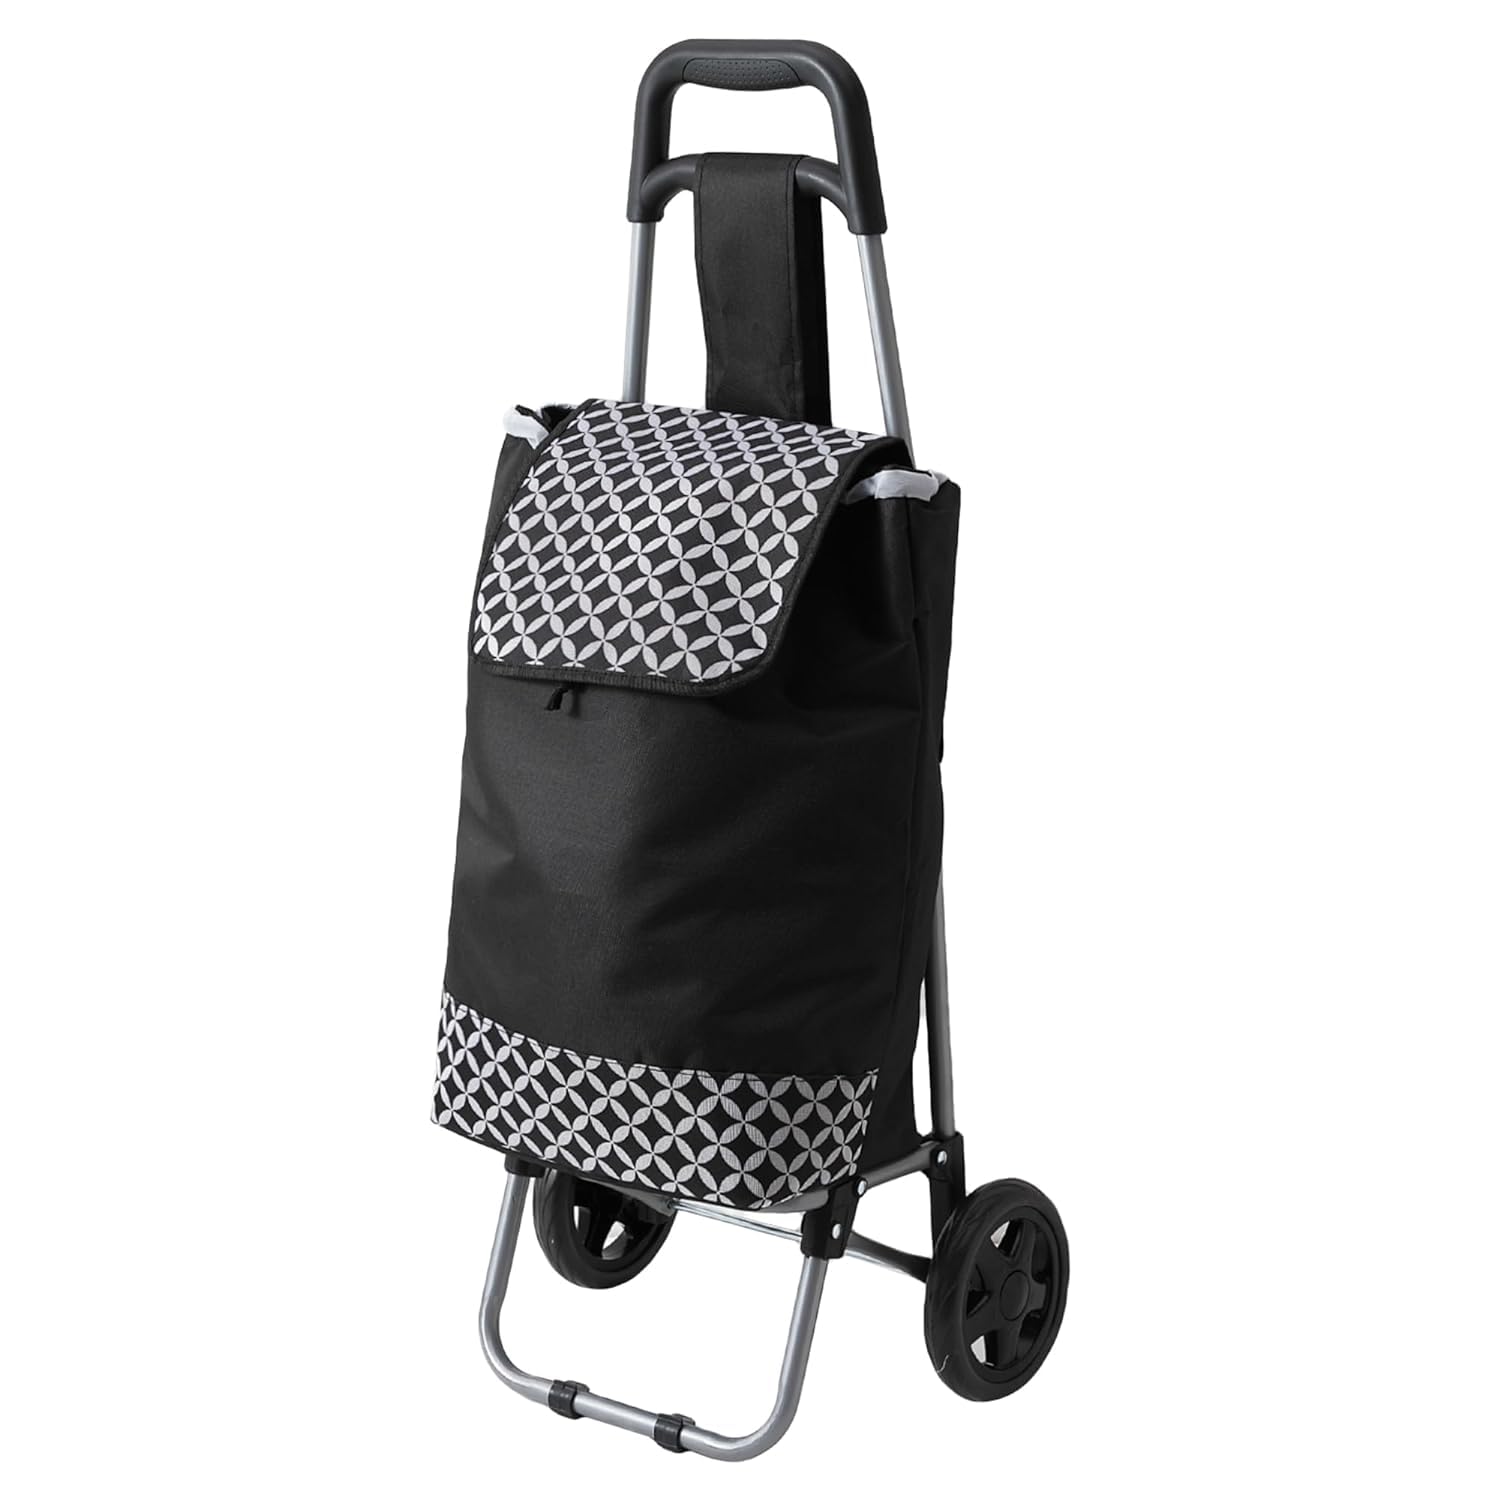 Cheston Shopping Bag for Grocery | Foldable Shopping Trolly Bag with Wheels | Large and Lightweight Shopping Trolly Bag with 30 Kg Capacity | Water-Proof Oxford Fabric with Multiple Pockets (Black)